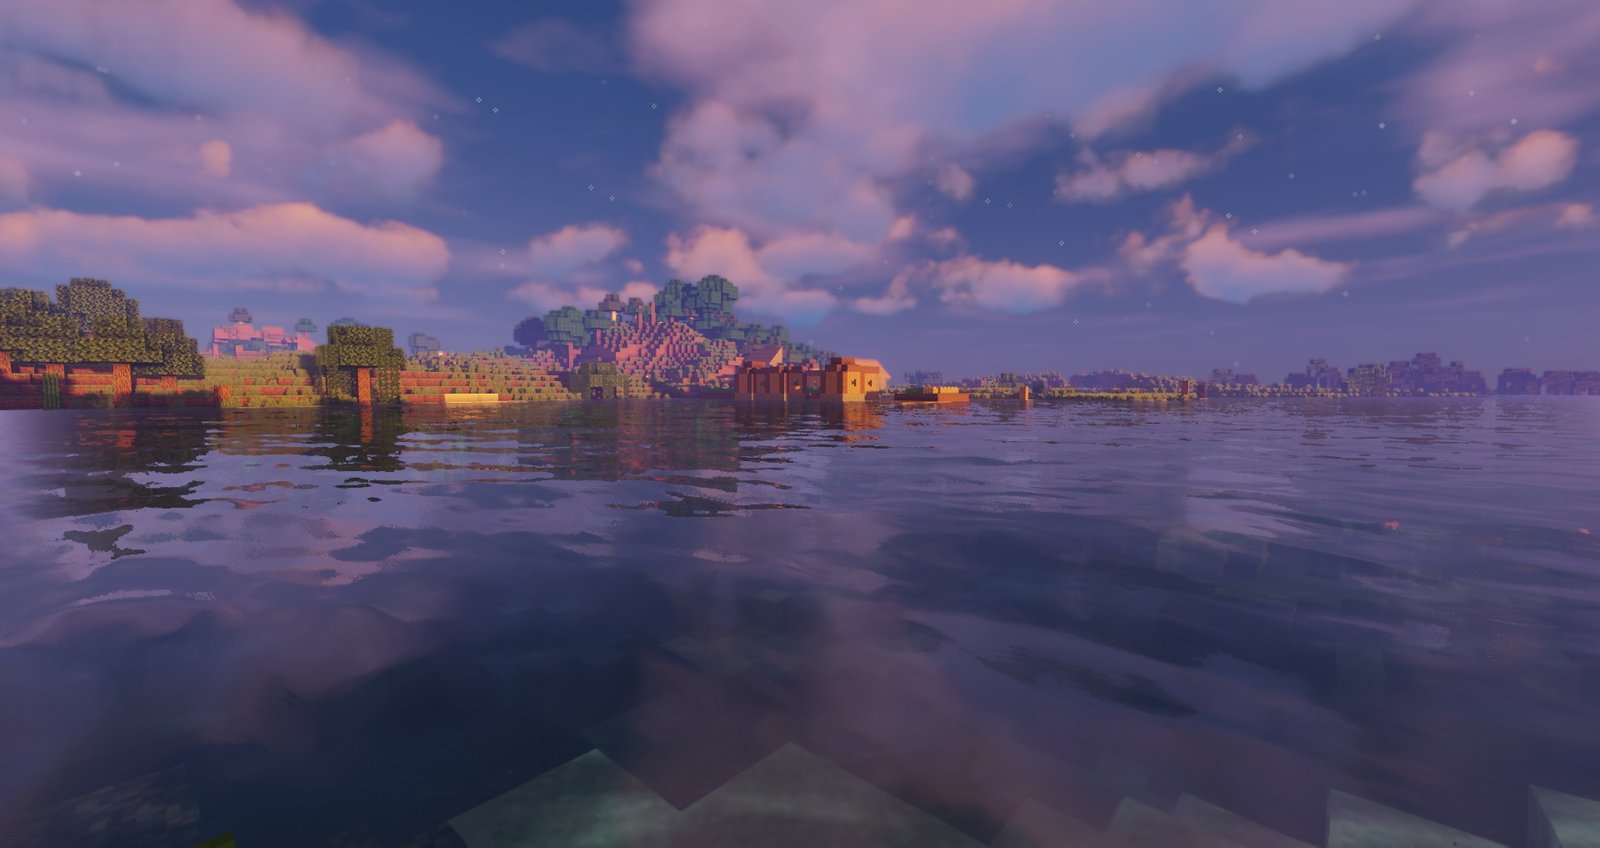 Minecraft shaders - Sildur's vibrant shaders showing a stretch of water at sunset across from a village